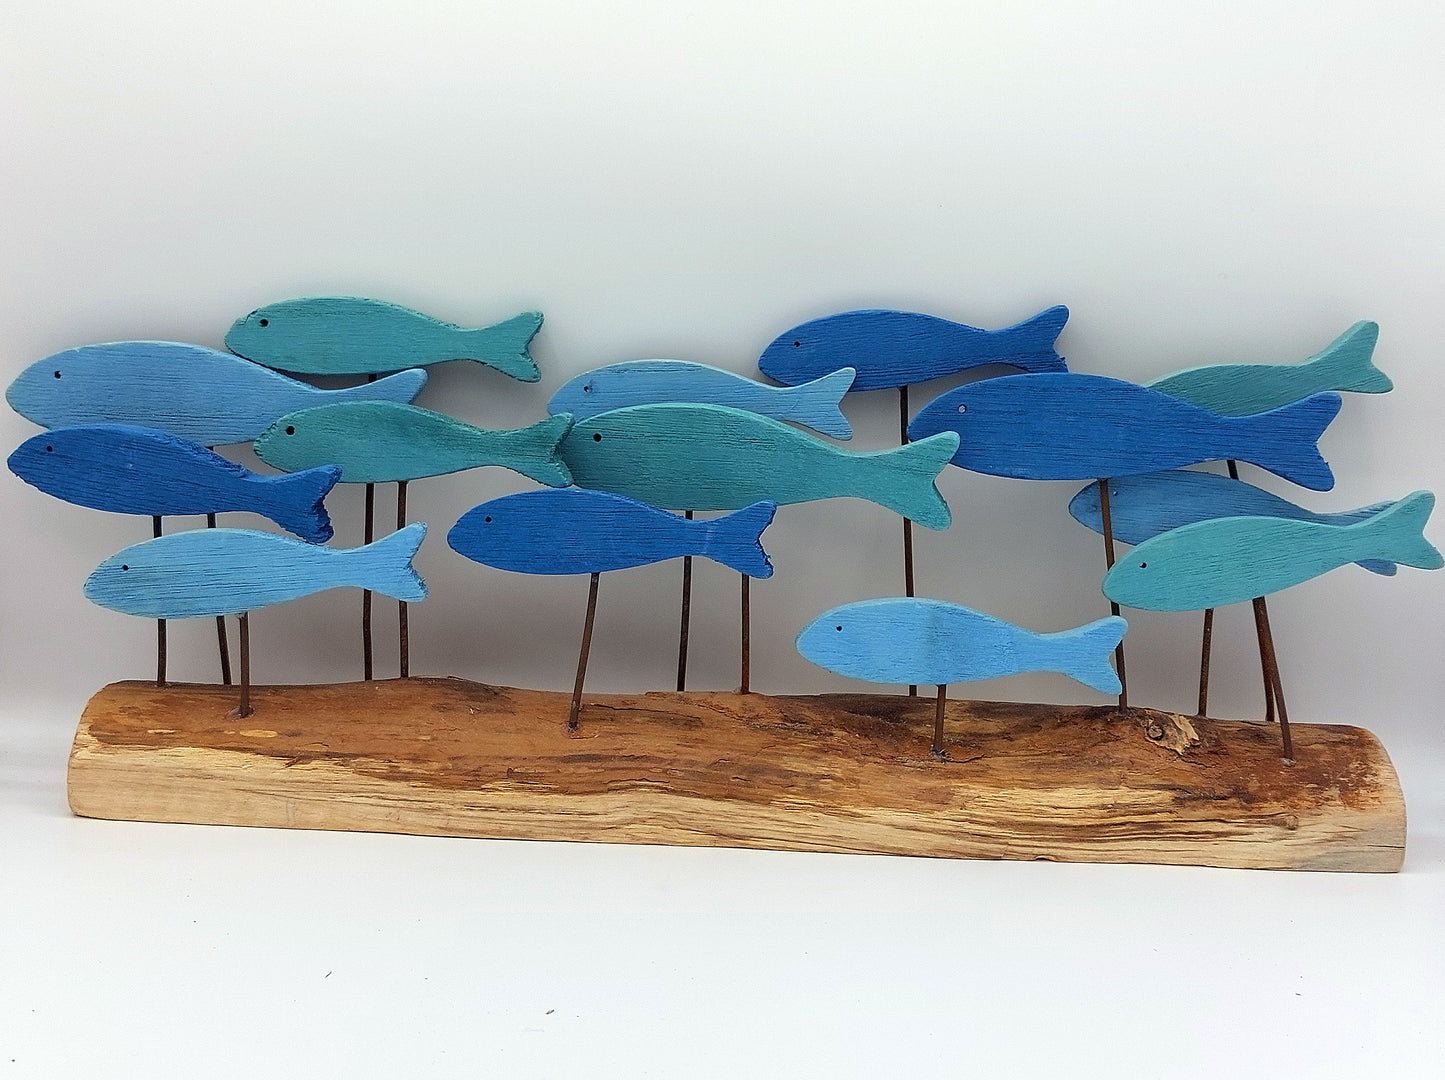 Driftwood Blue & Green table top School of Fish.